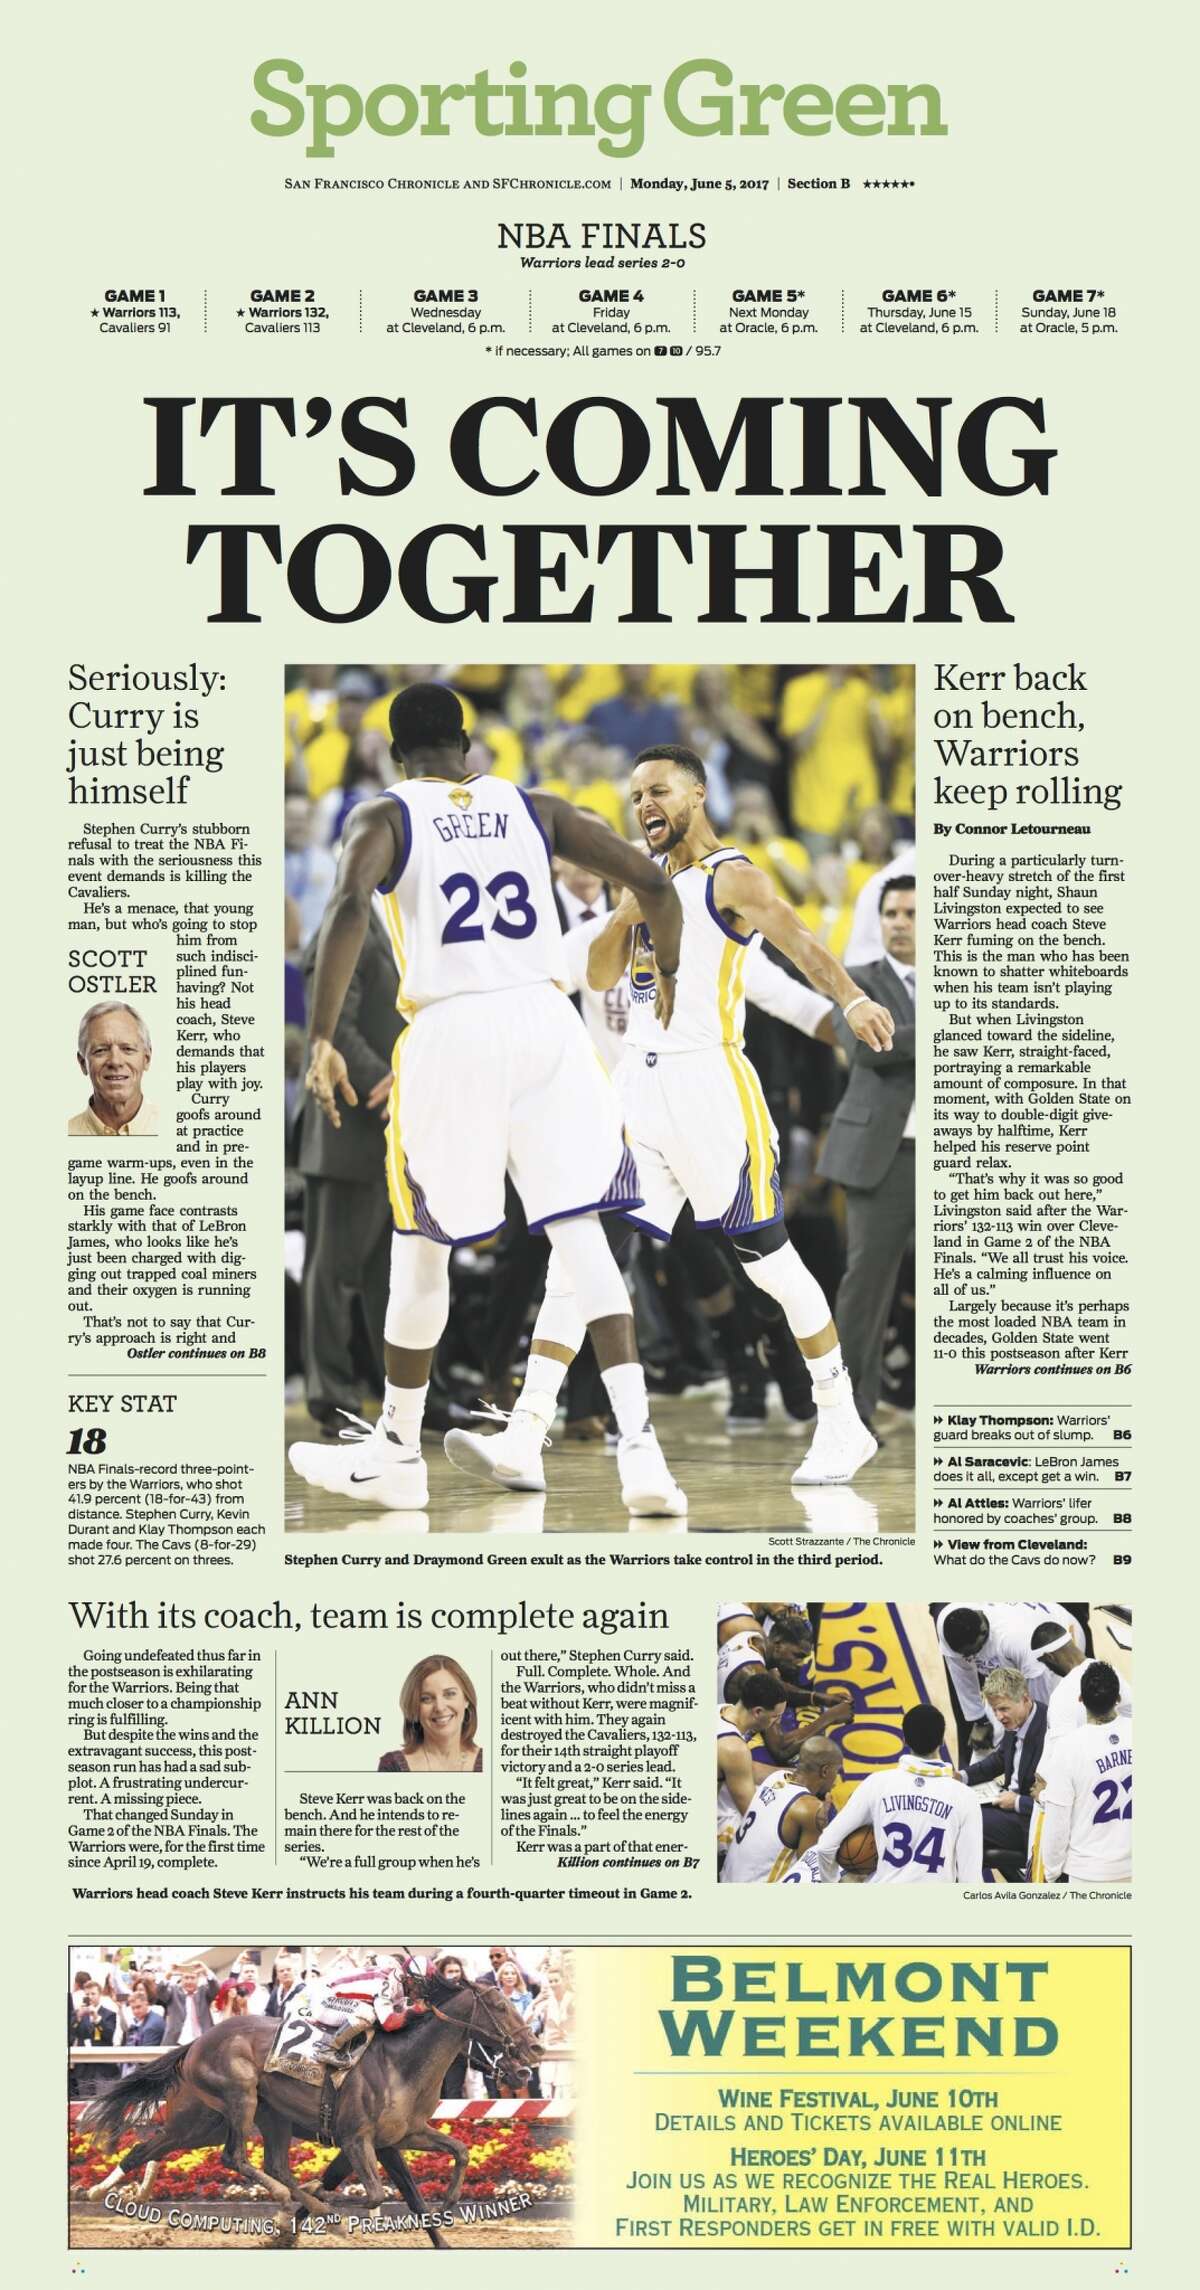 Warriors-Cavaliers NBA Finals Game 2 as featured in the San Francisco Chronicle's Sporting Green, June 5th, 2017. Purchase copies of this historic newspaper in The Chronicle Store.  